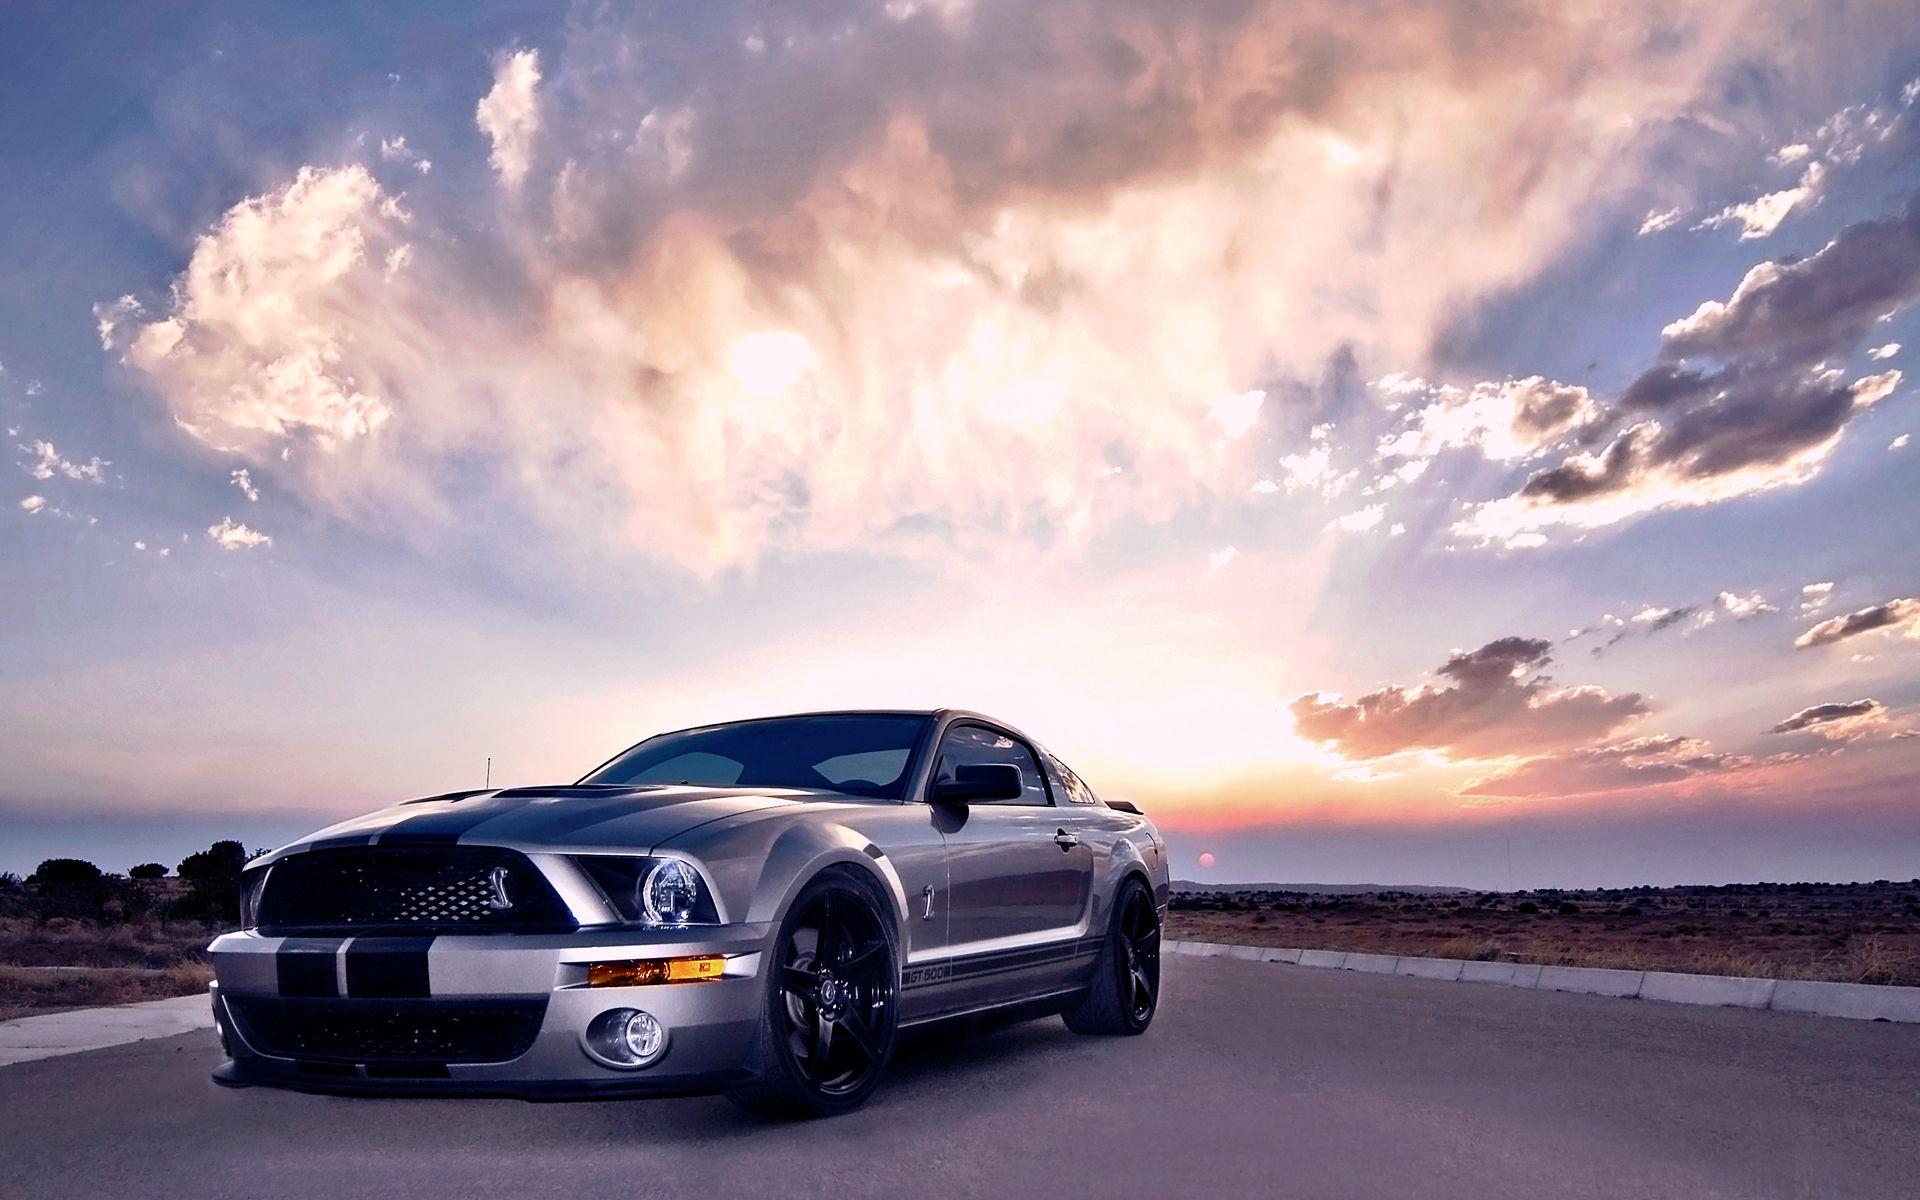 Shelby Mustang Wallpaper High Definition #mZD. Cars